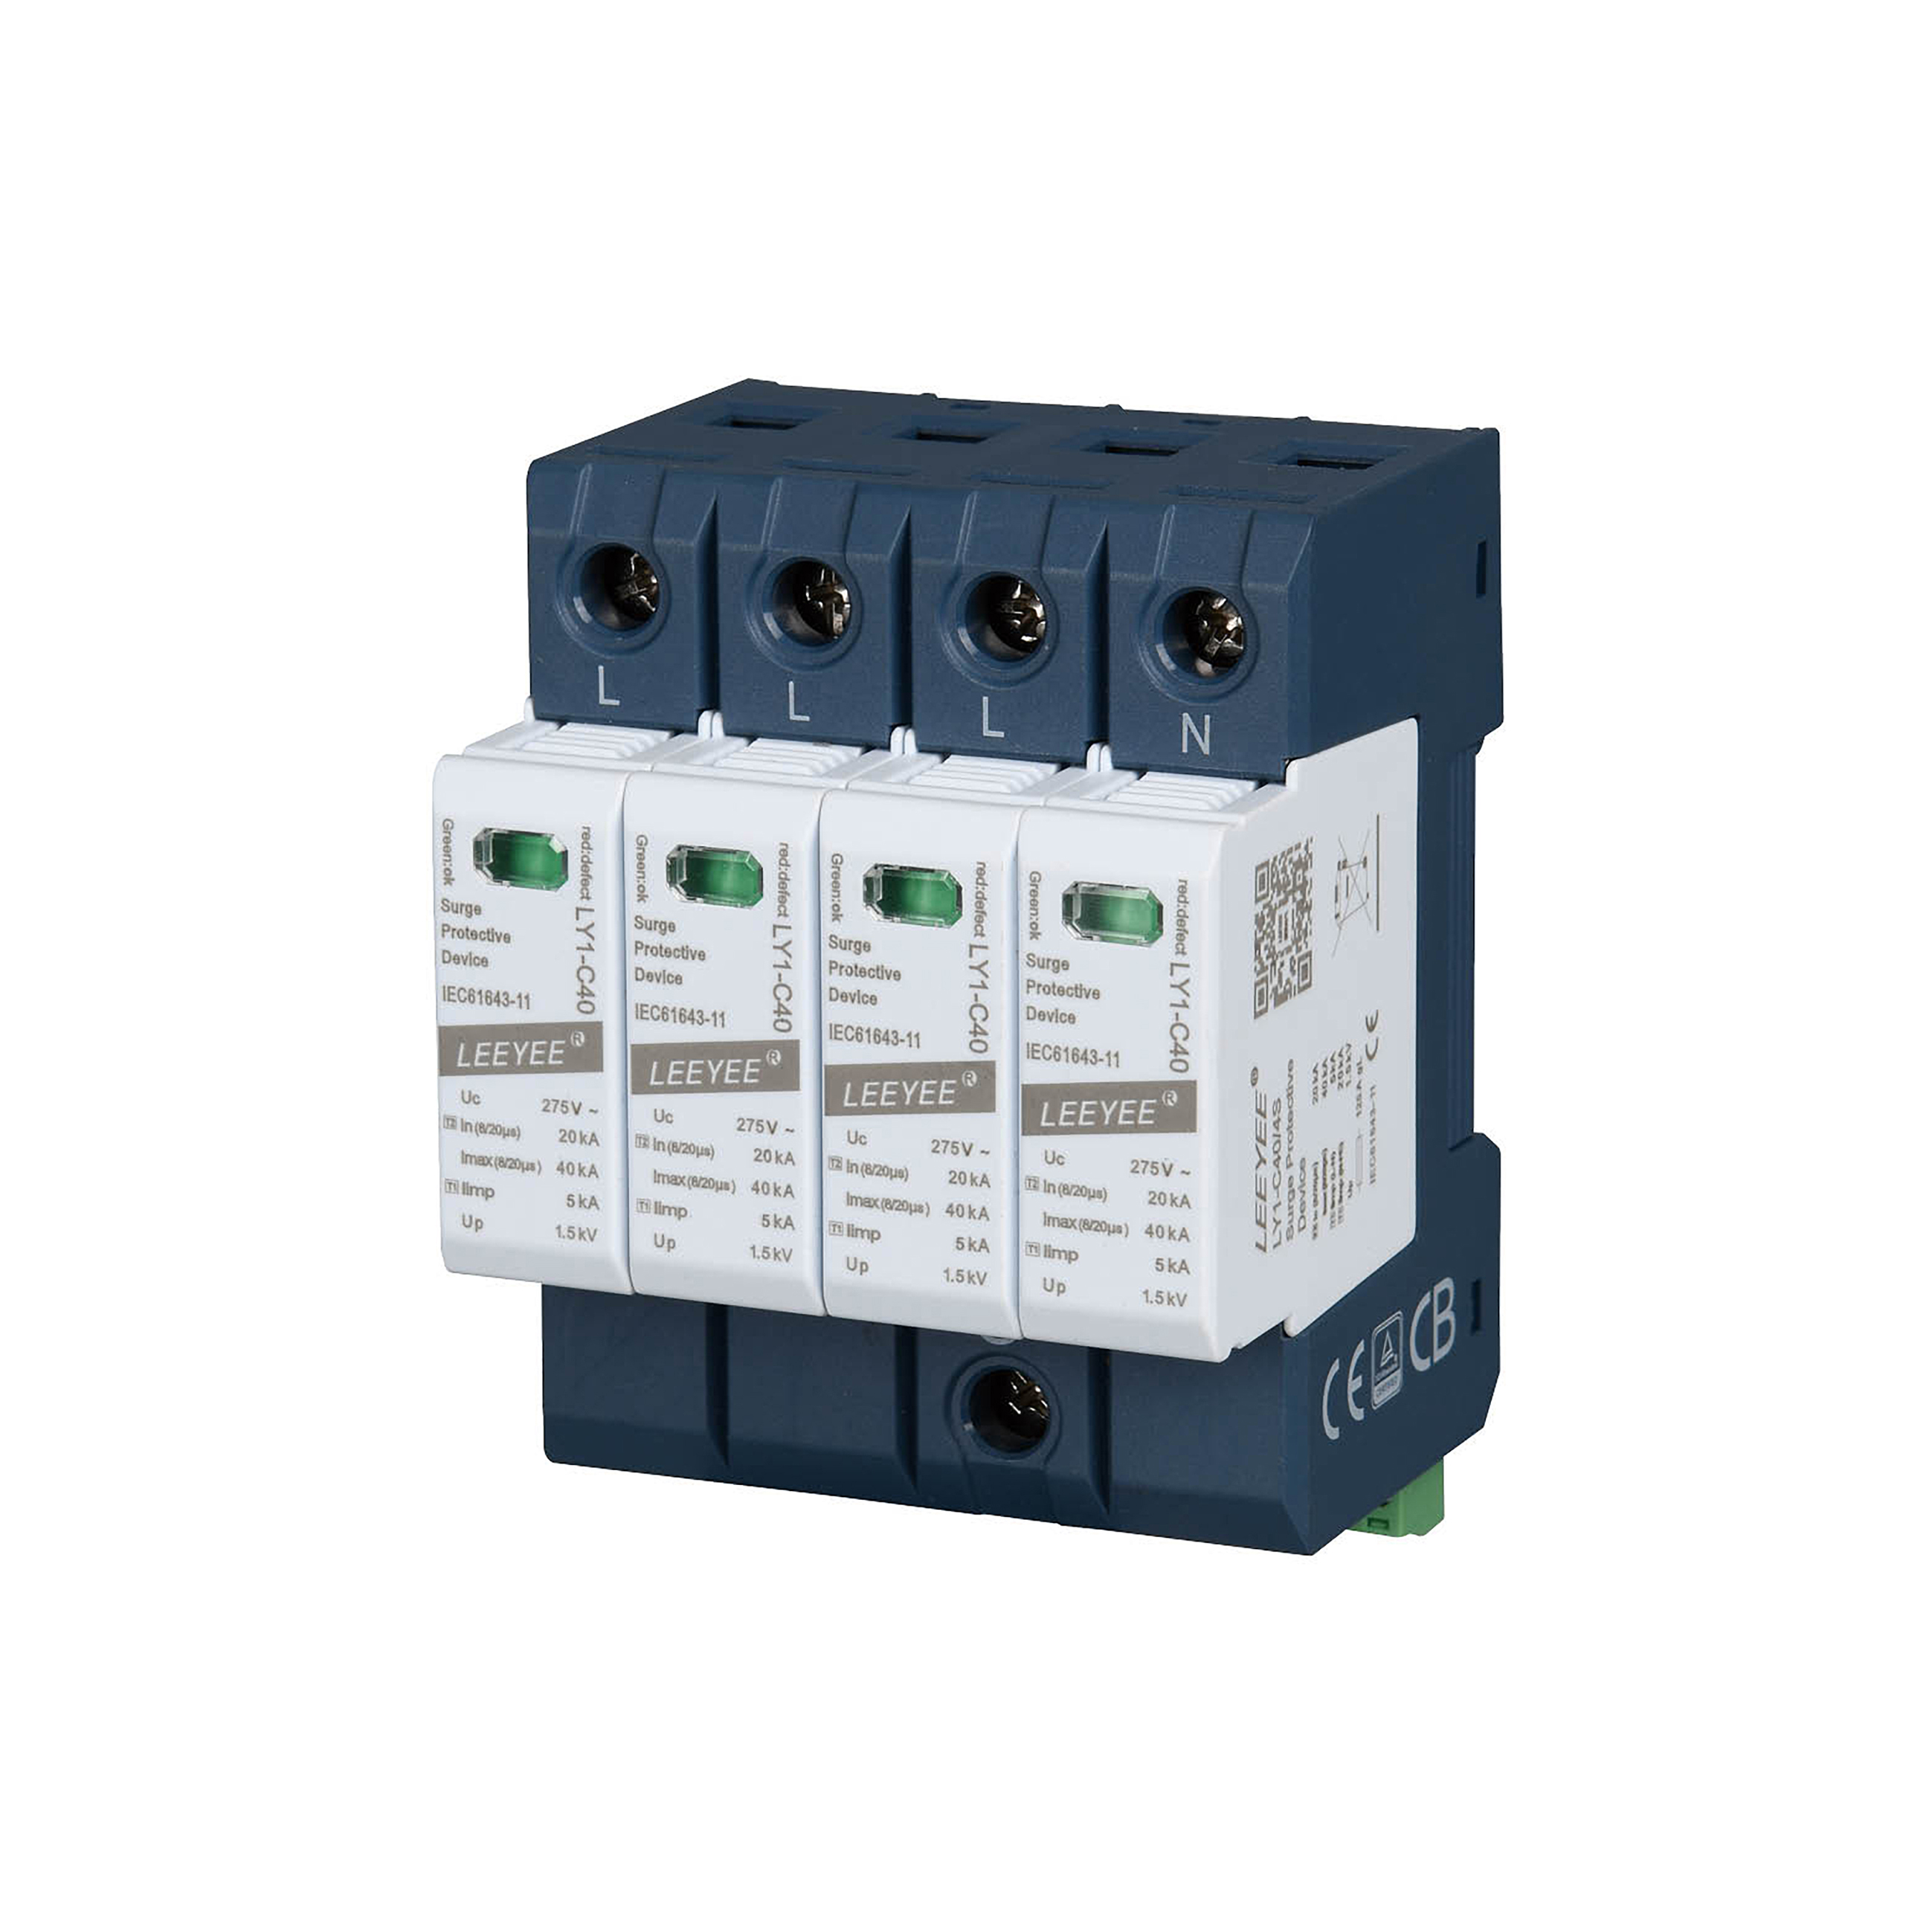 China LY1-C40 Surge Protection Device Manufacturer and Supplier 